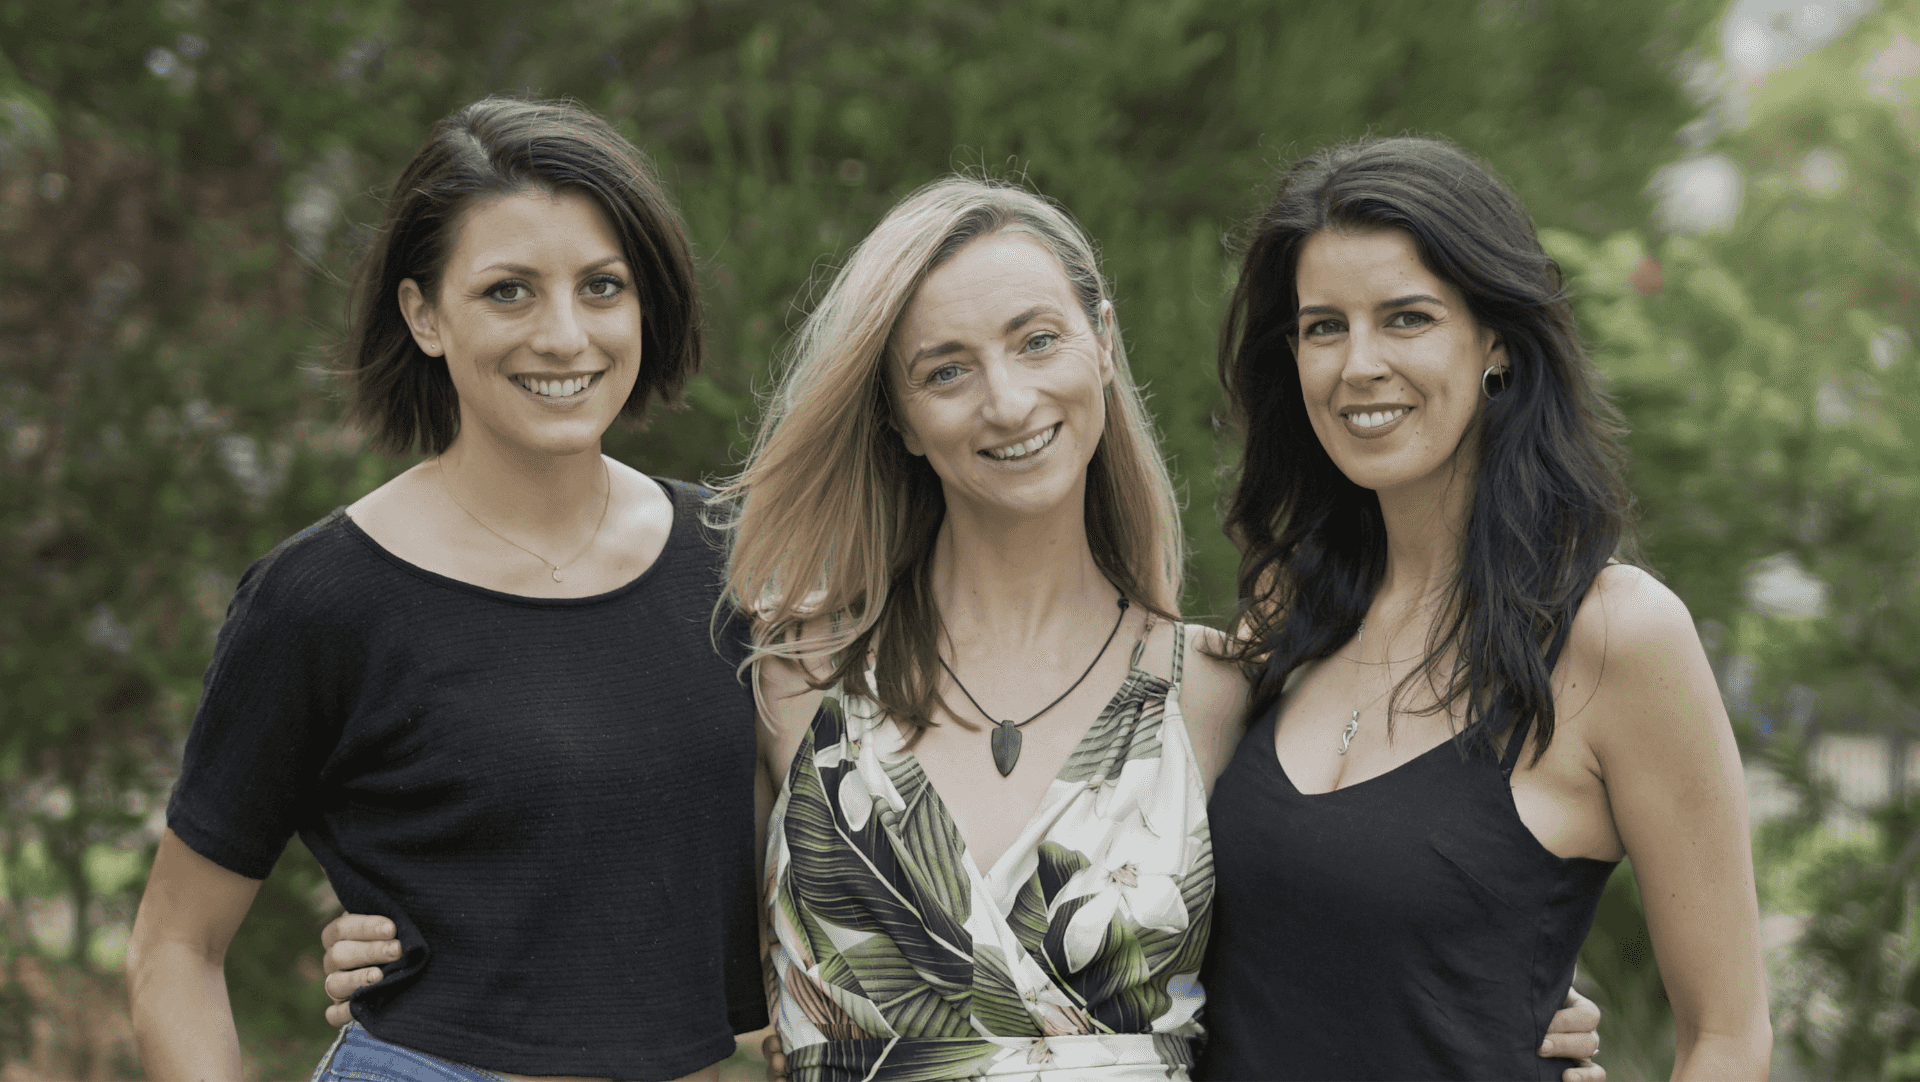 Press Release: Three Aussie women on a mission to become the global watchdog invite all Australians to invest in their business The Clean Collective